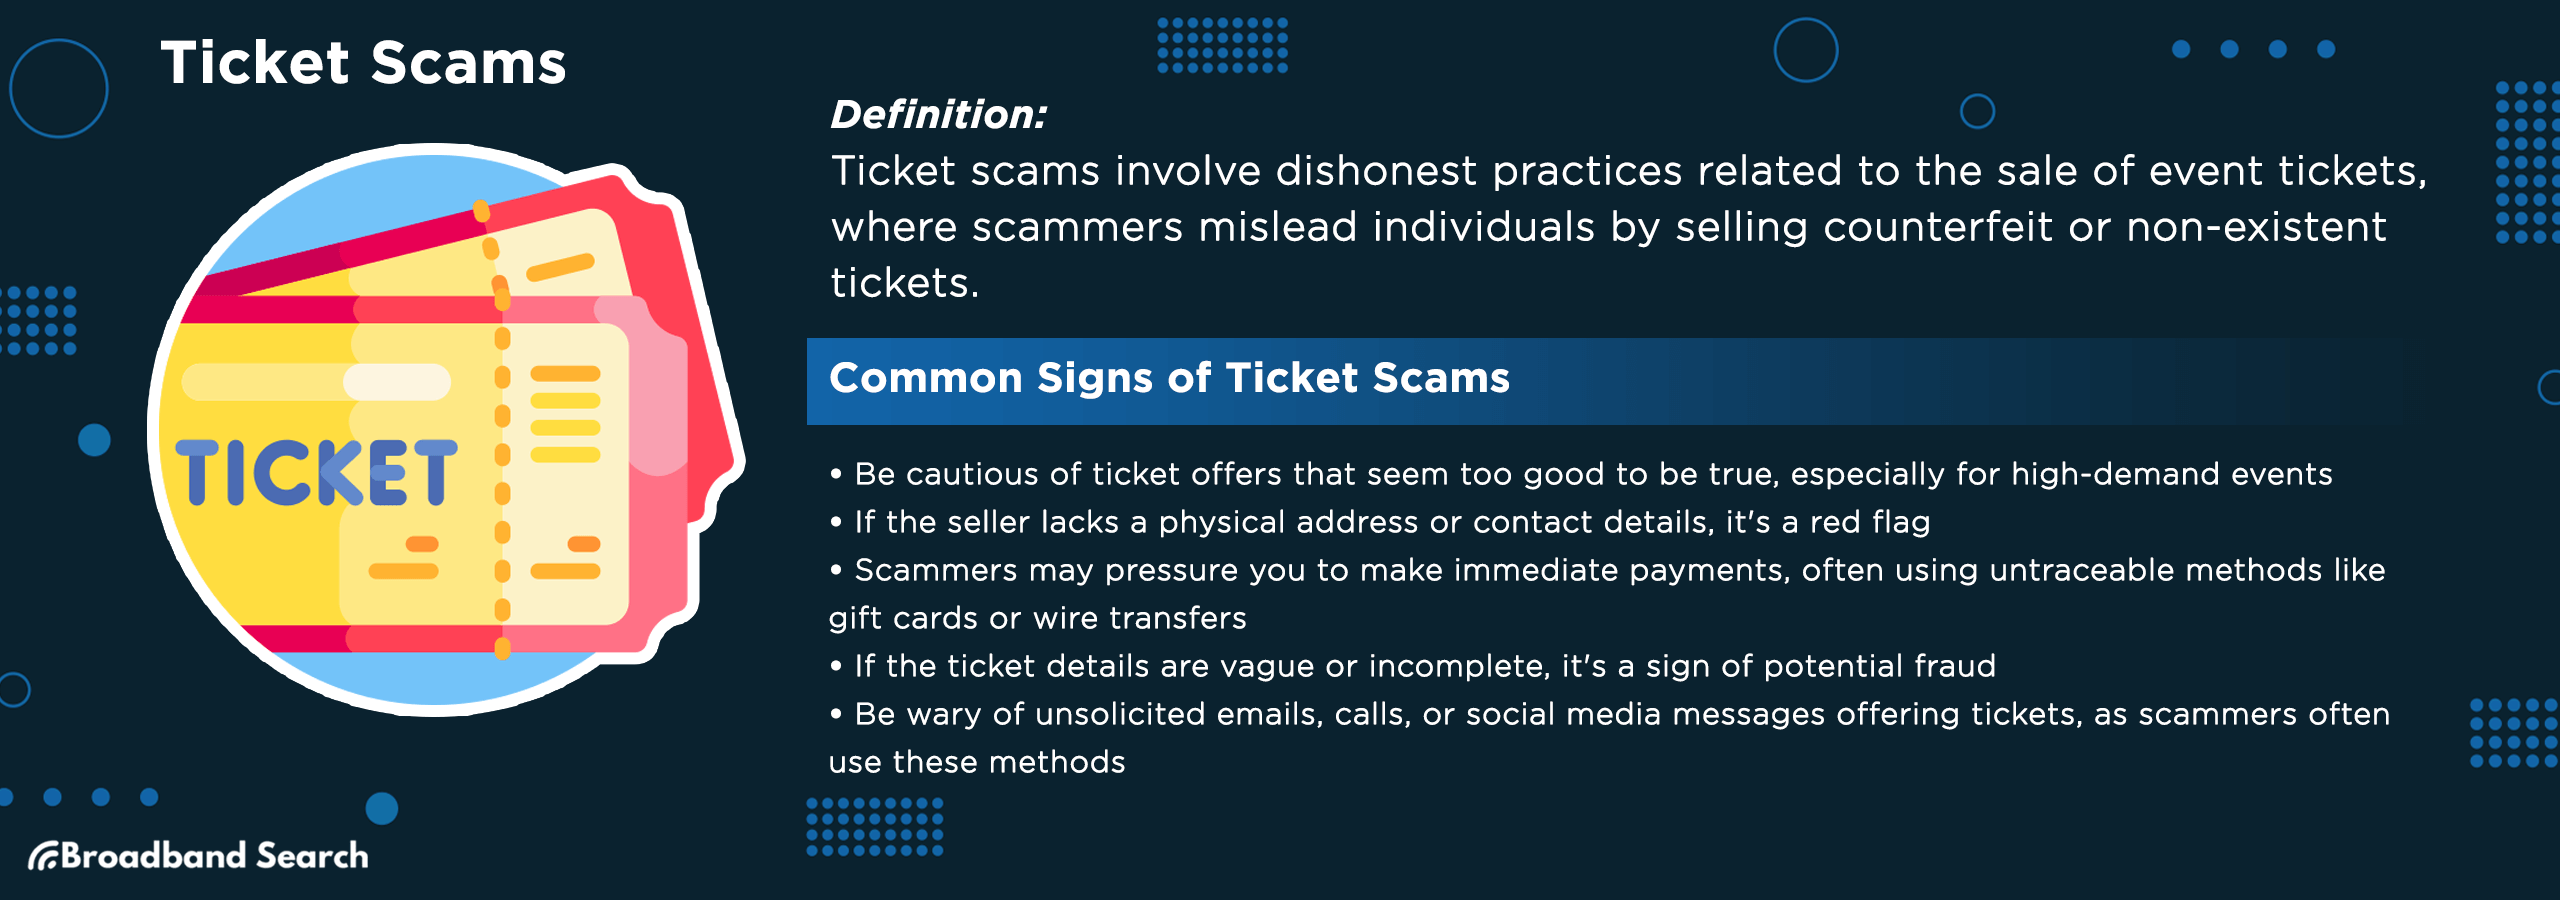 Definition and signs of Ticket Scams